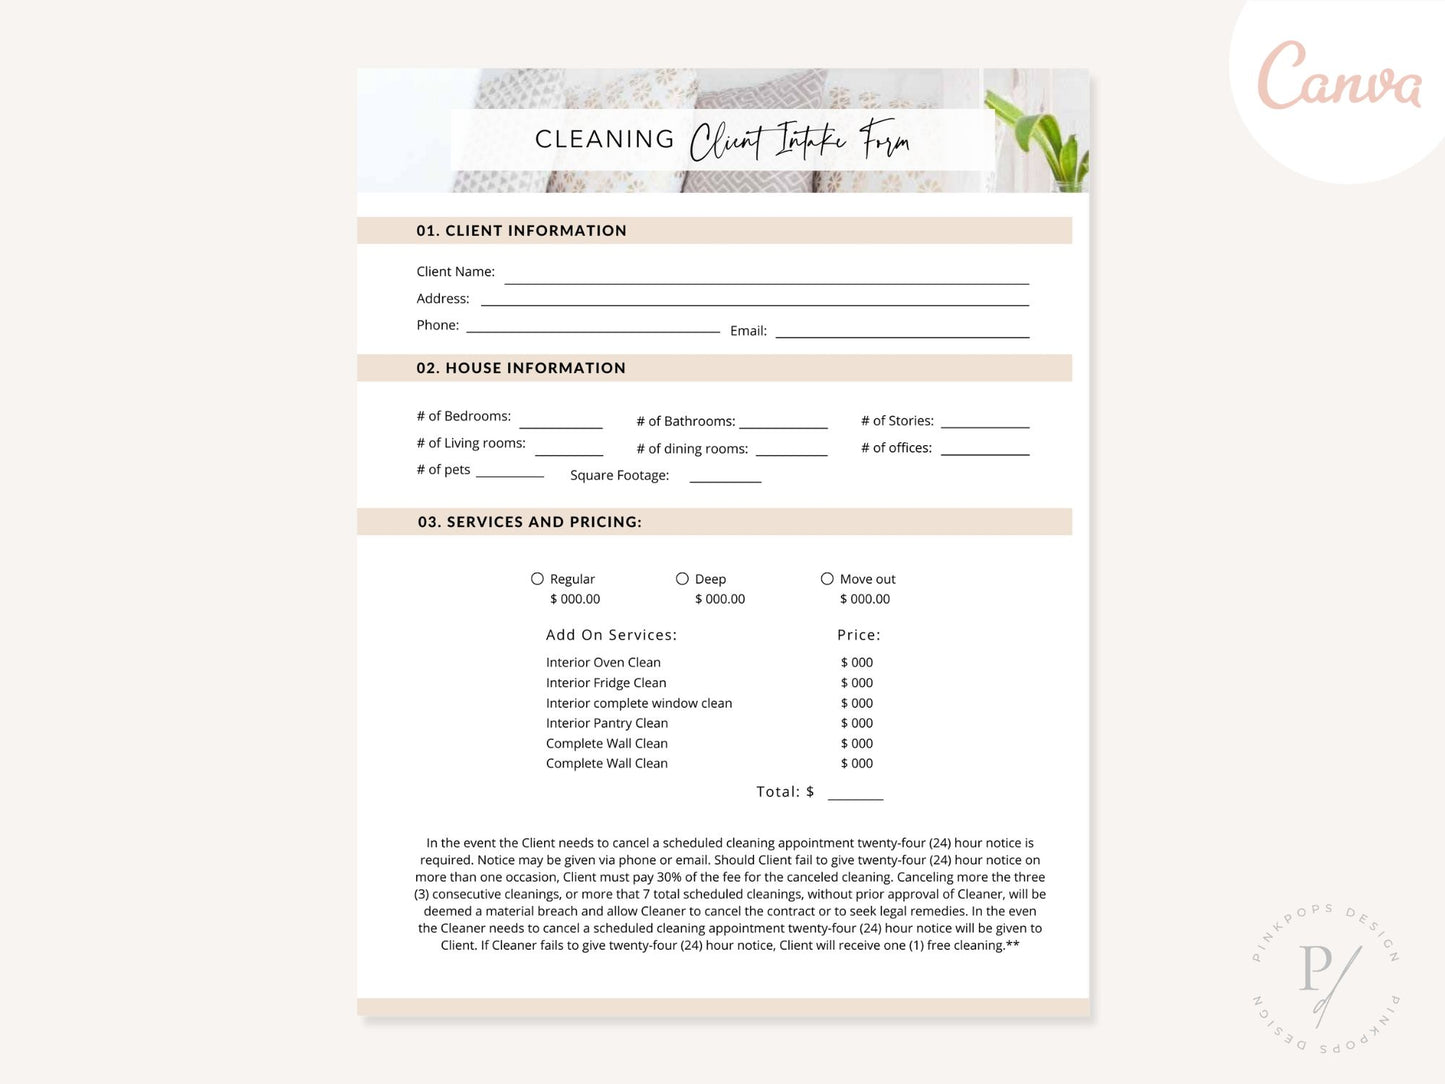 Cleaning Client Intake Form - Editable template for efficient client onboarding, gathering essential information to tailor and provide exceptional cleaning services based on individual needs and preferences.